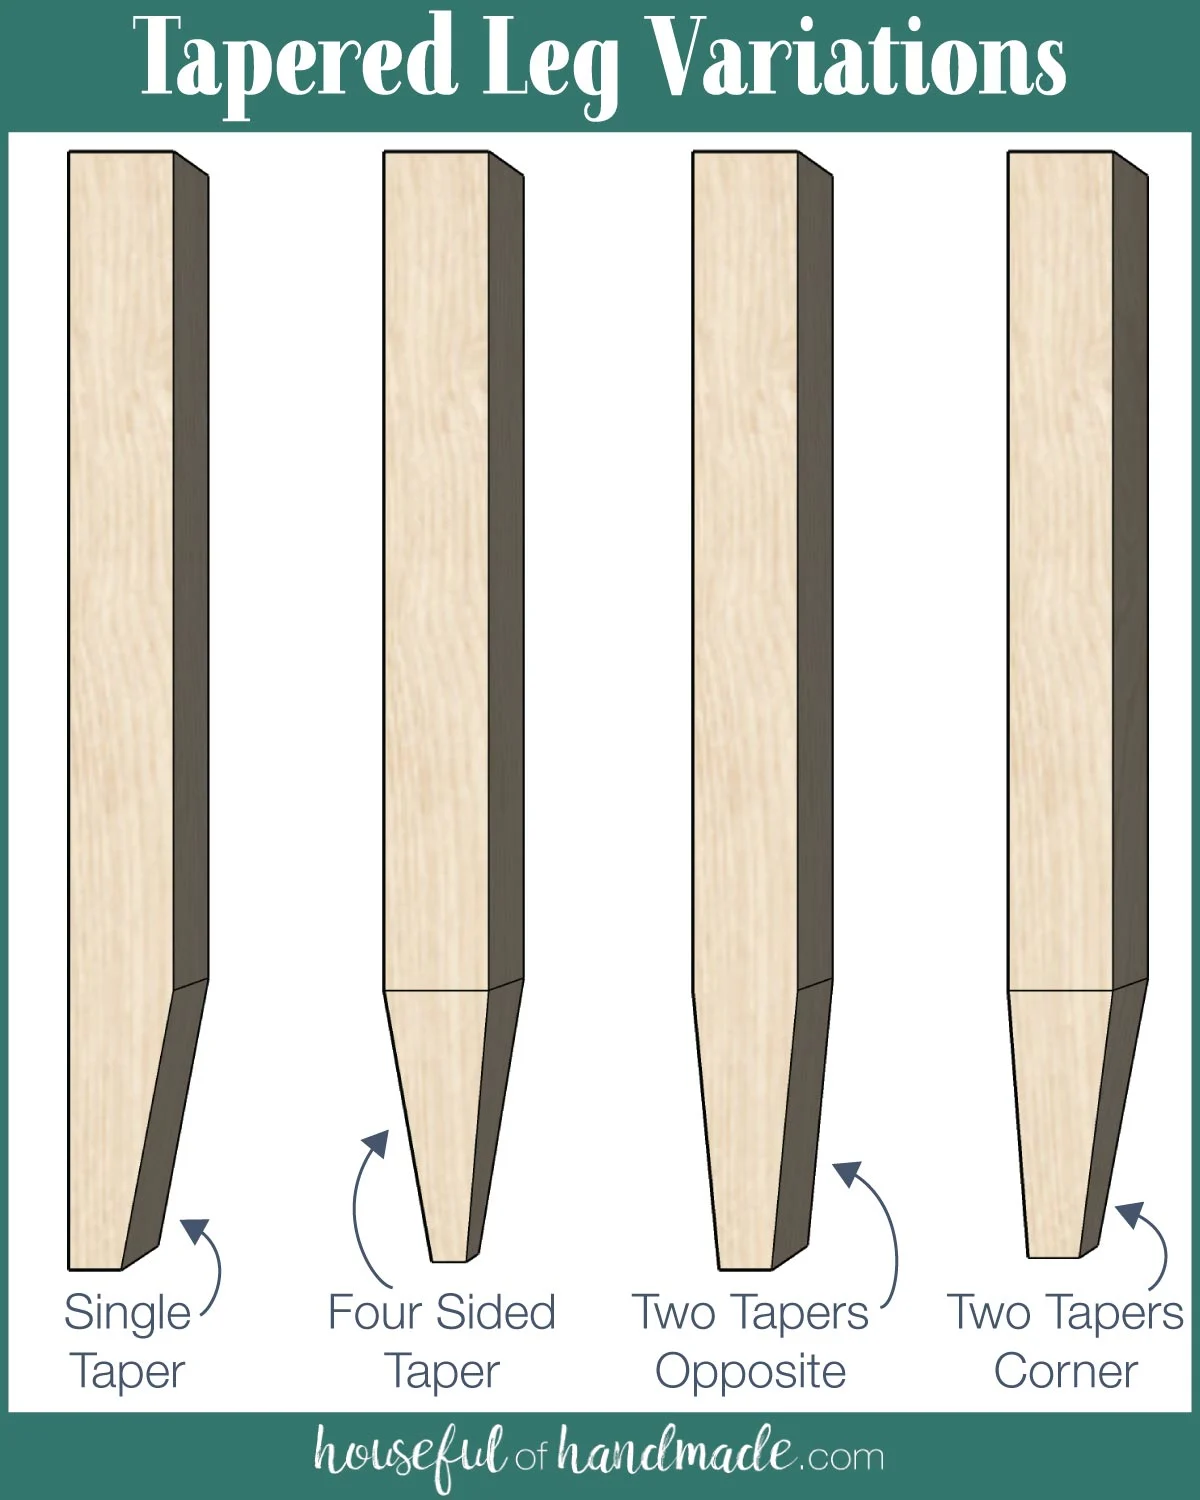 Drawings of 4 different variations of a tapered leg. 